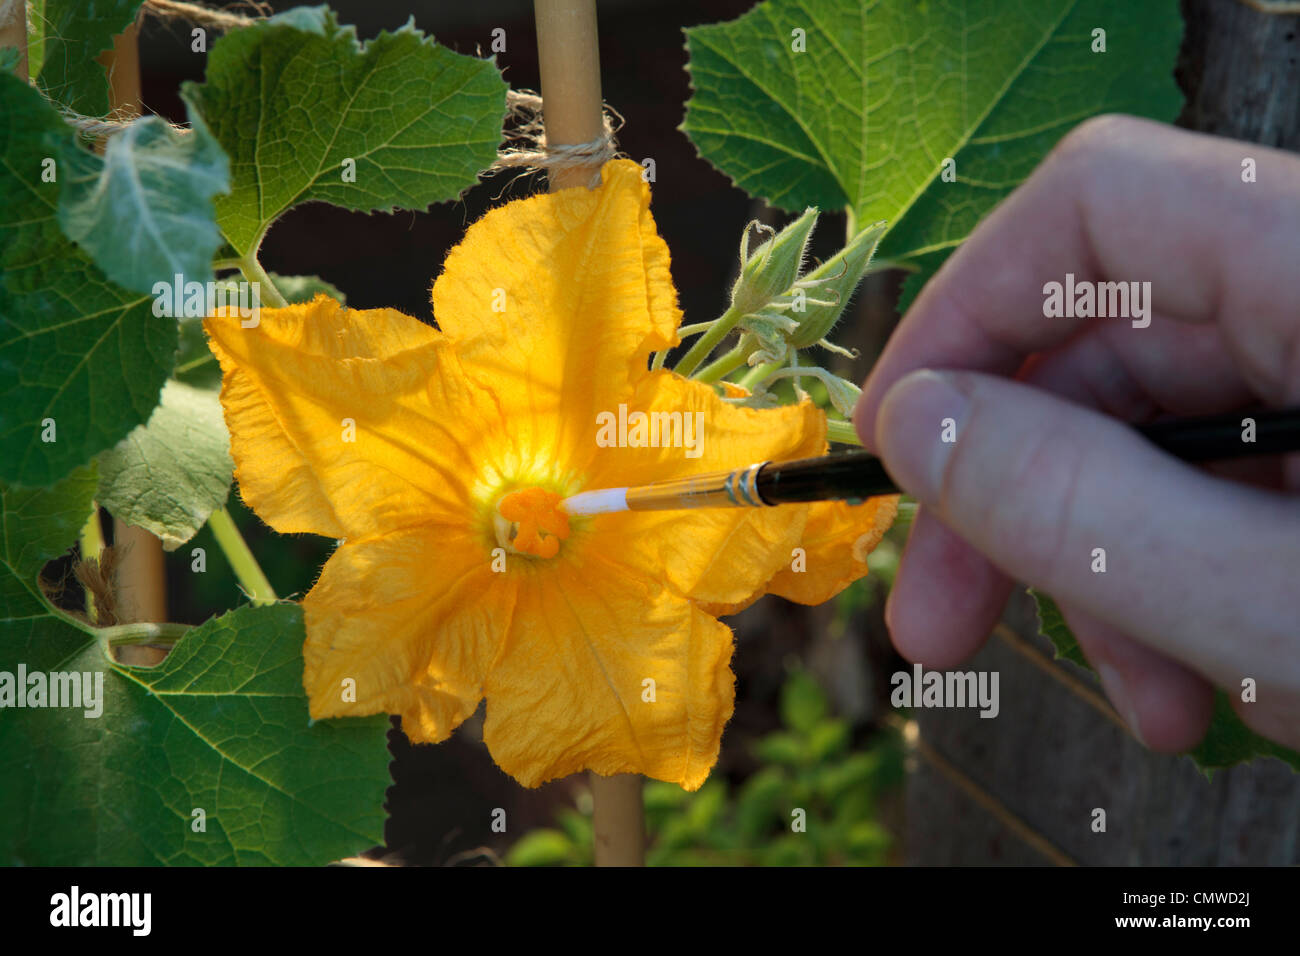 Hand pollinating a female squash flower with pollen from the male flower using a brush. Stock Photo